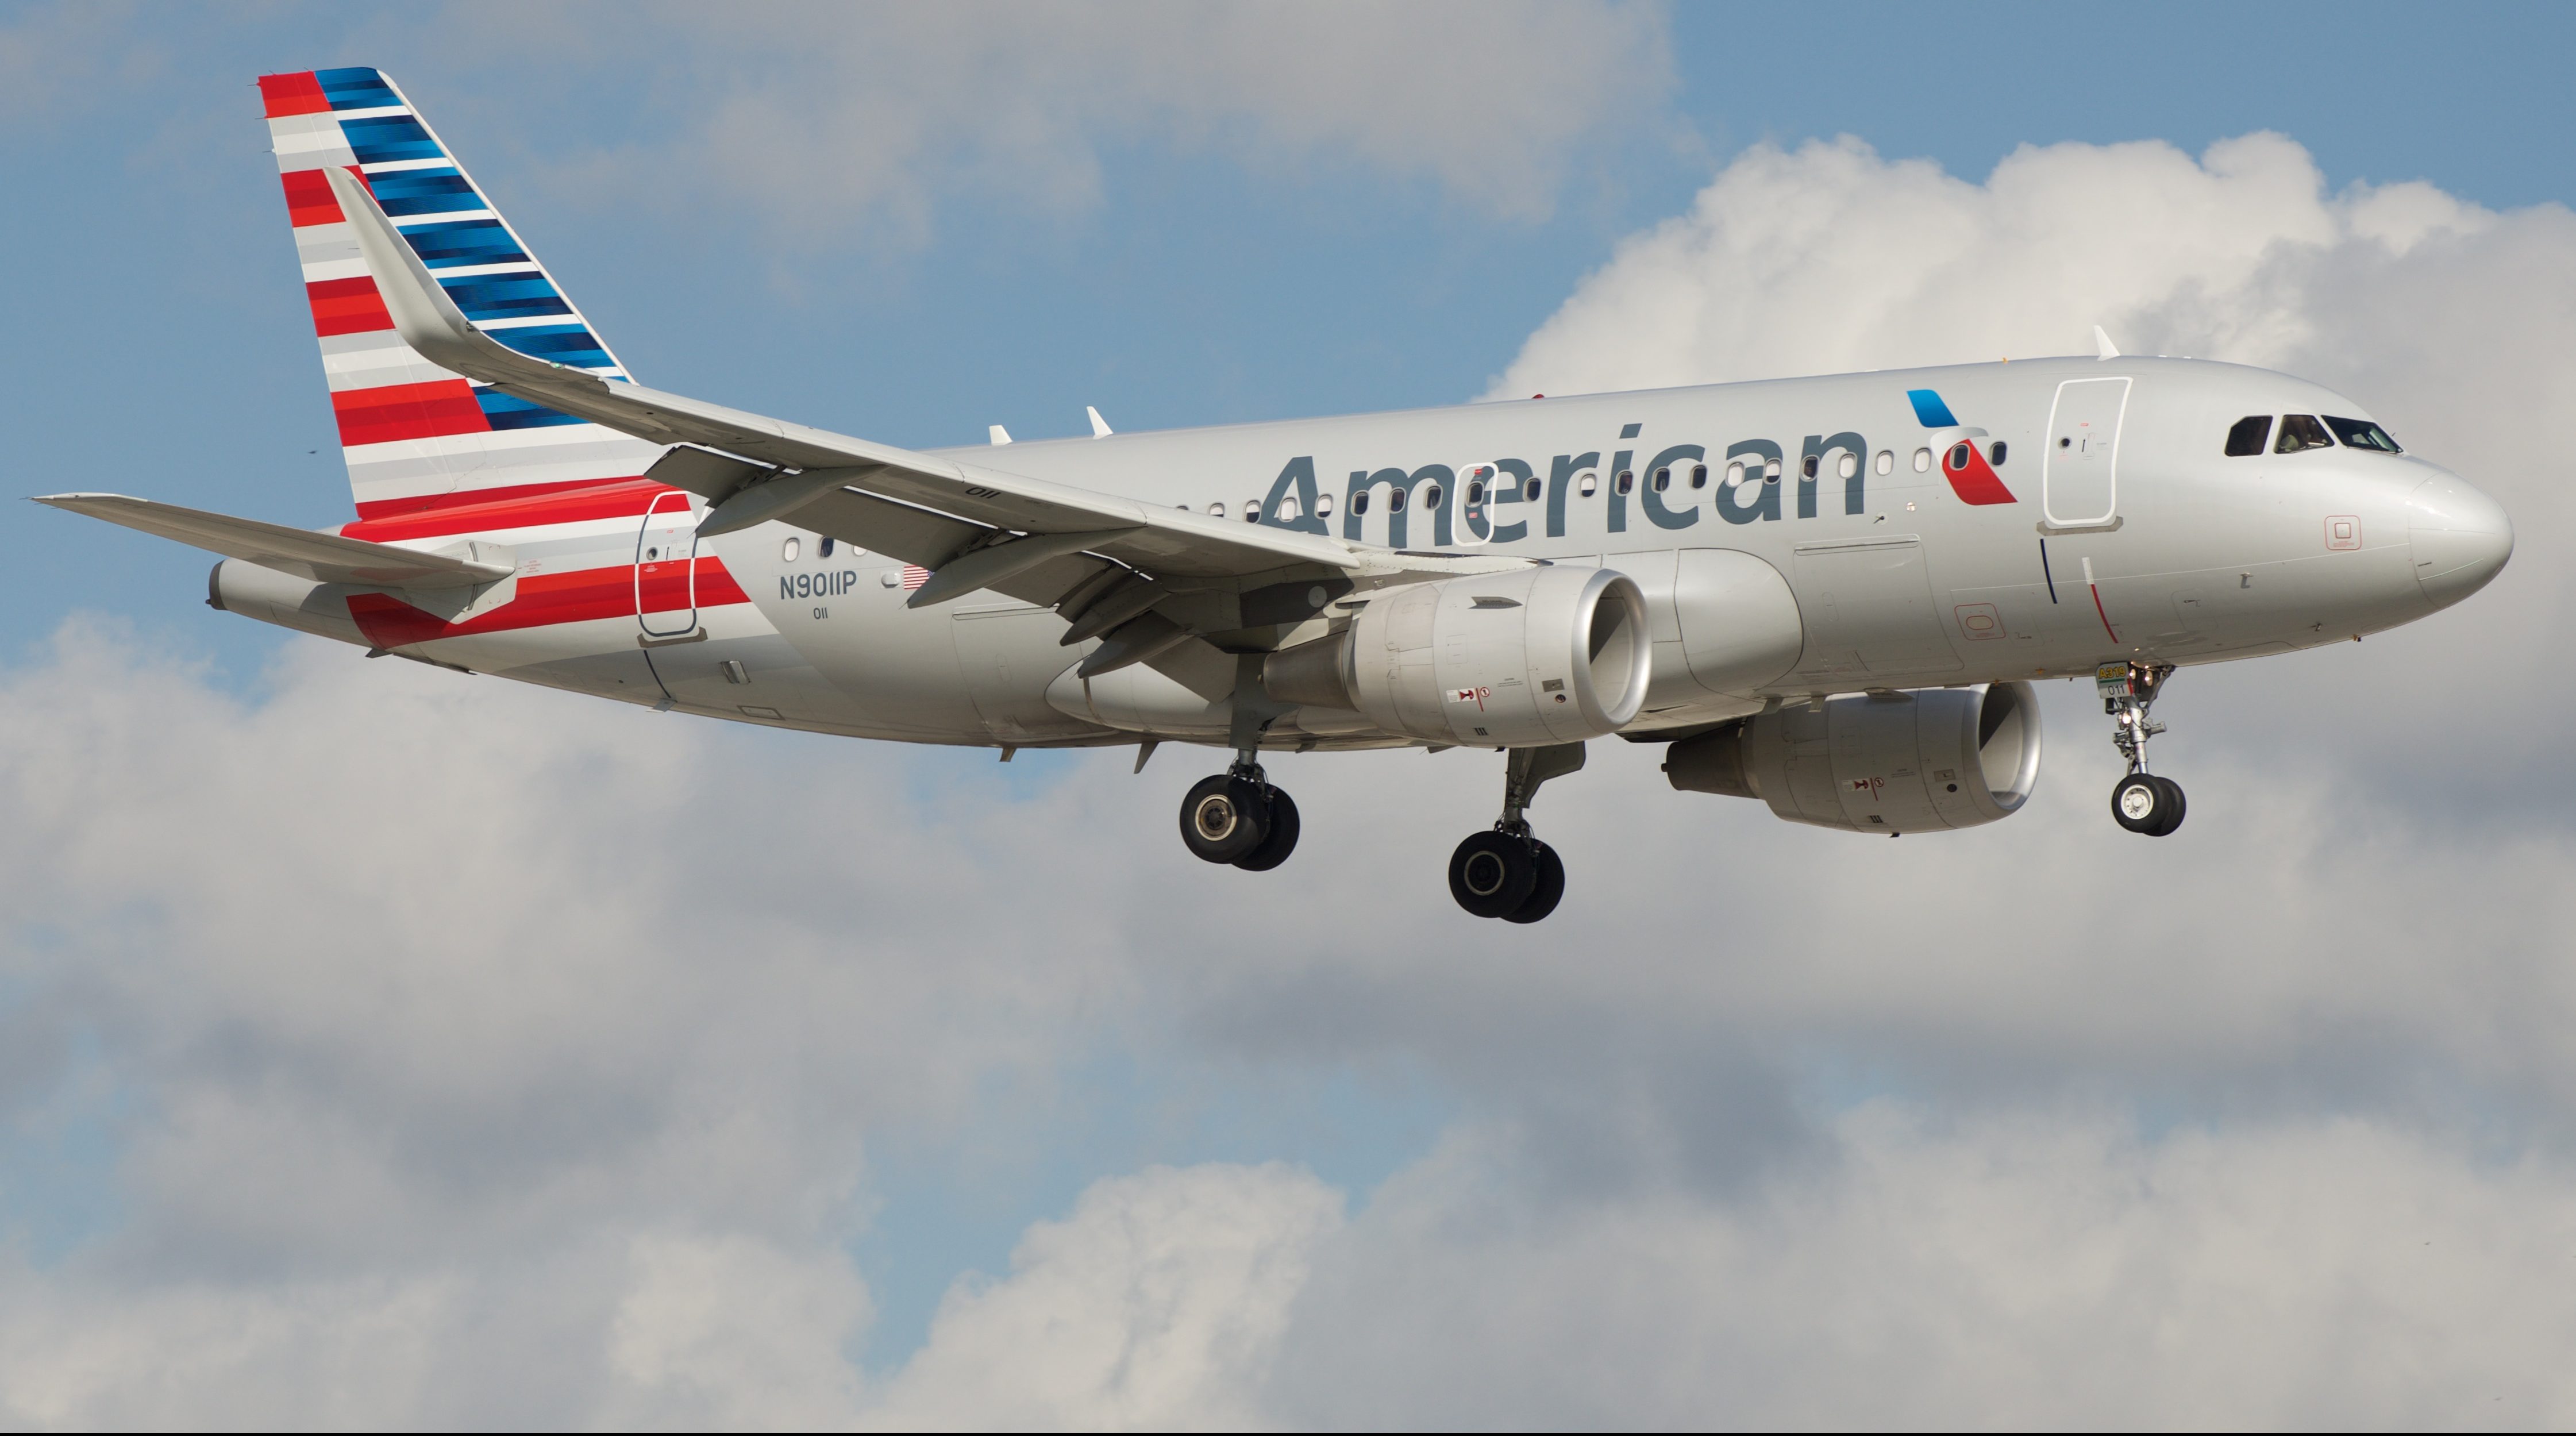                      Flight Review: American (Airbus A319) First Class From Los Angles to Denver                             
                     